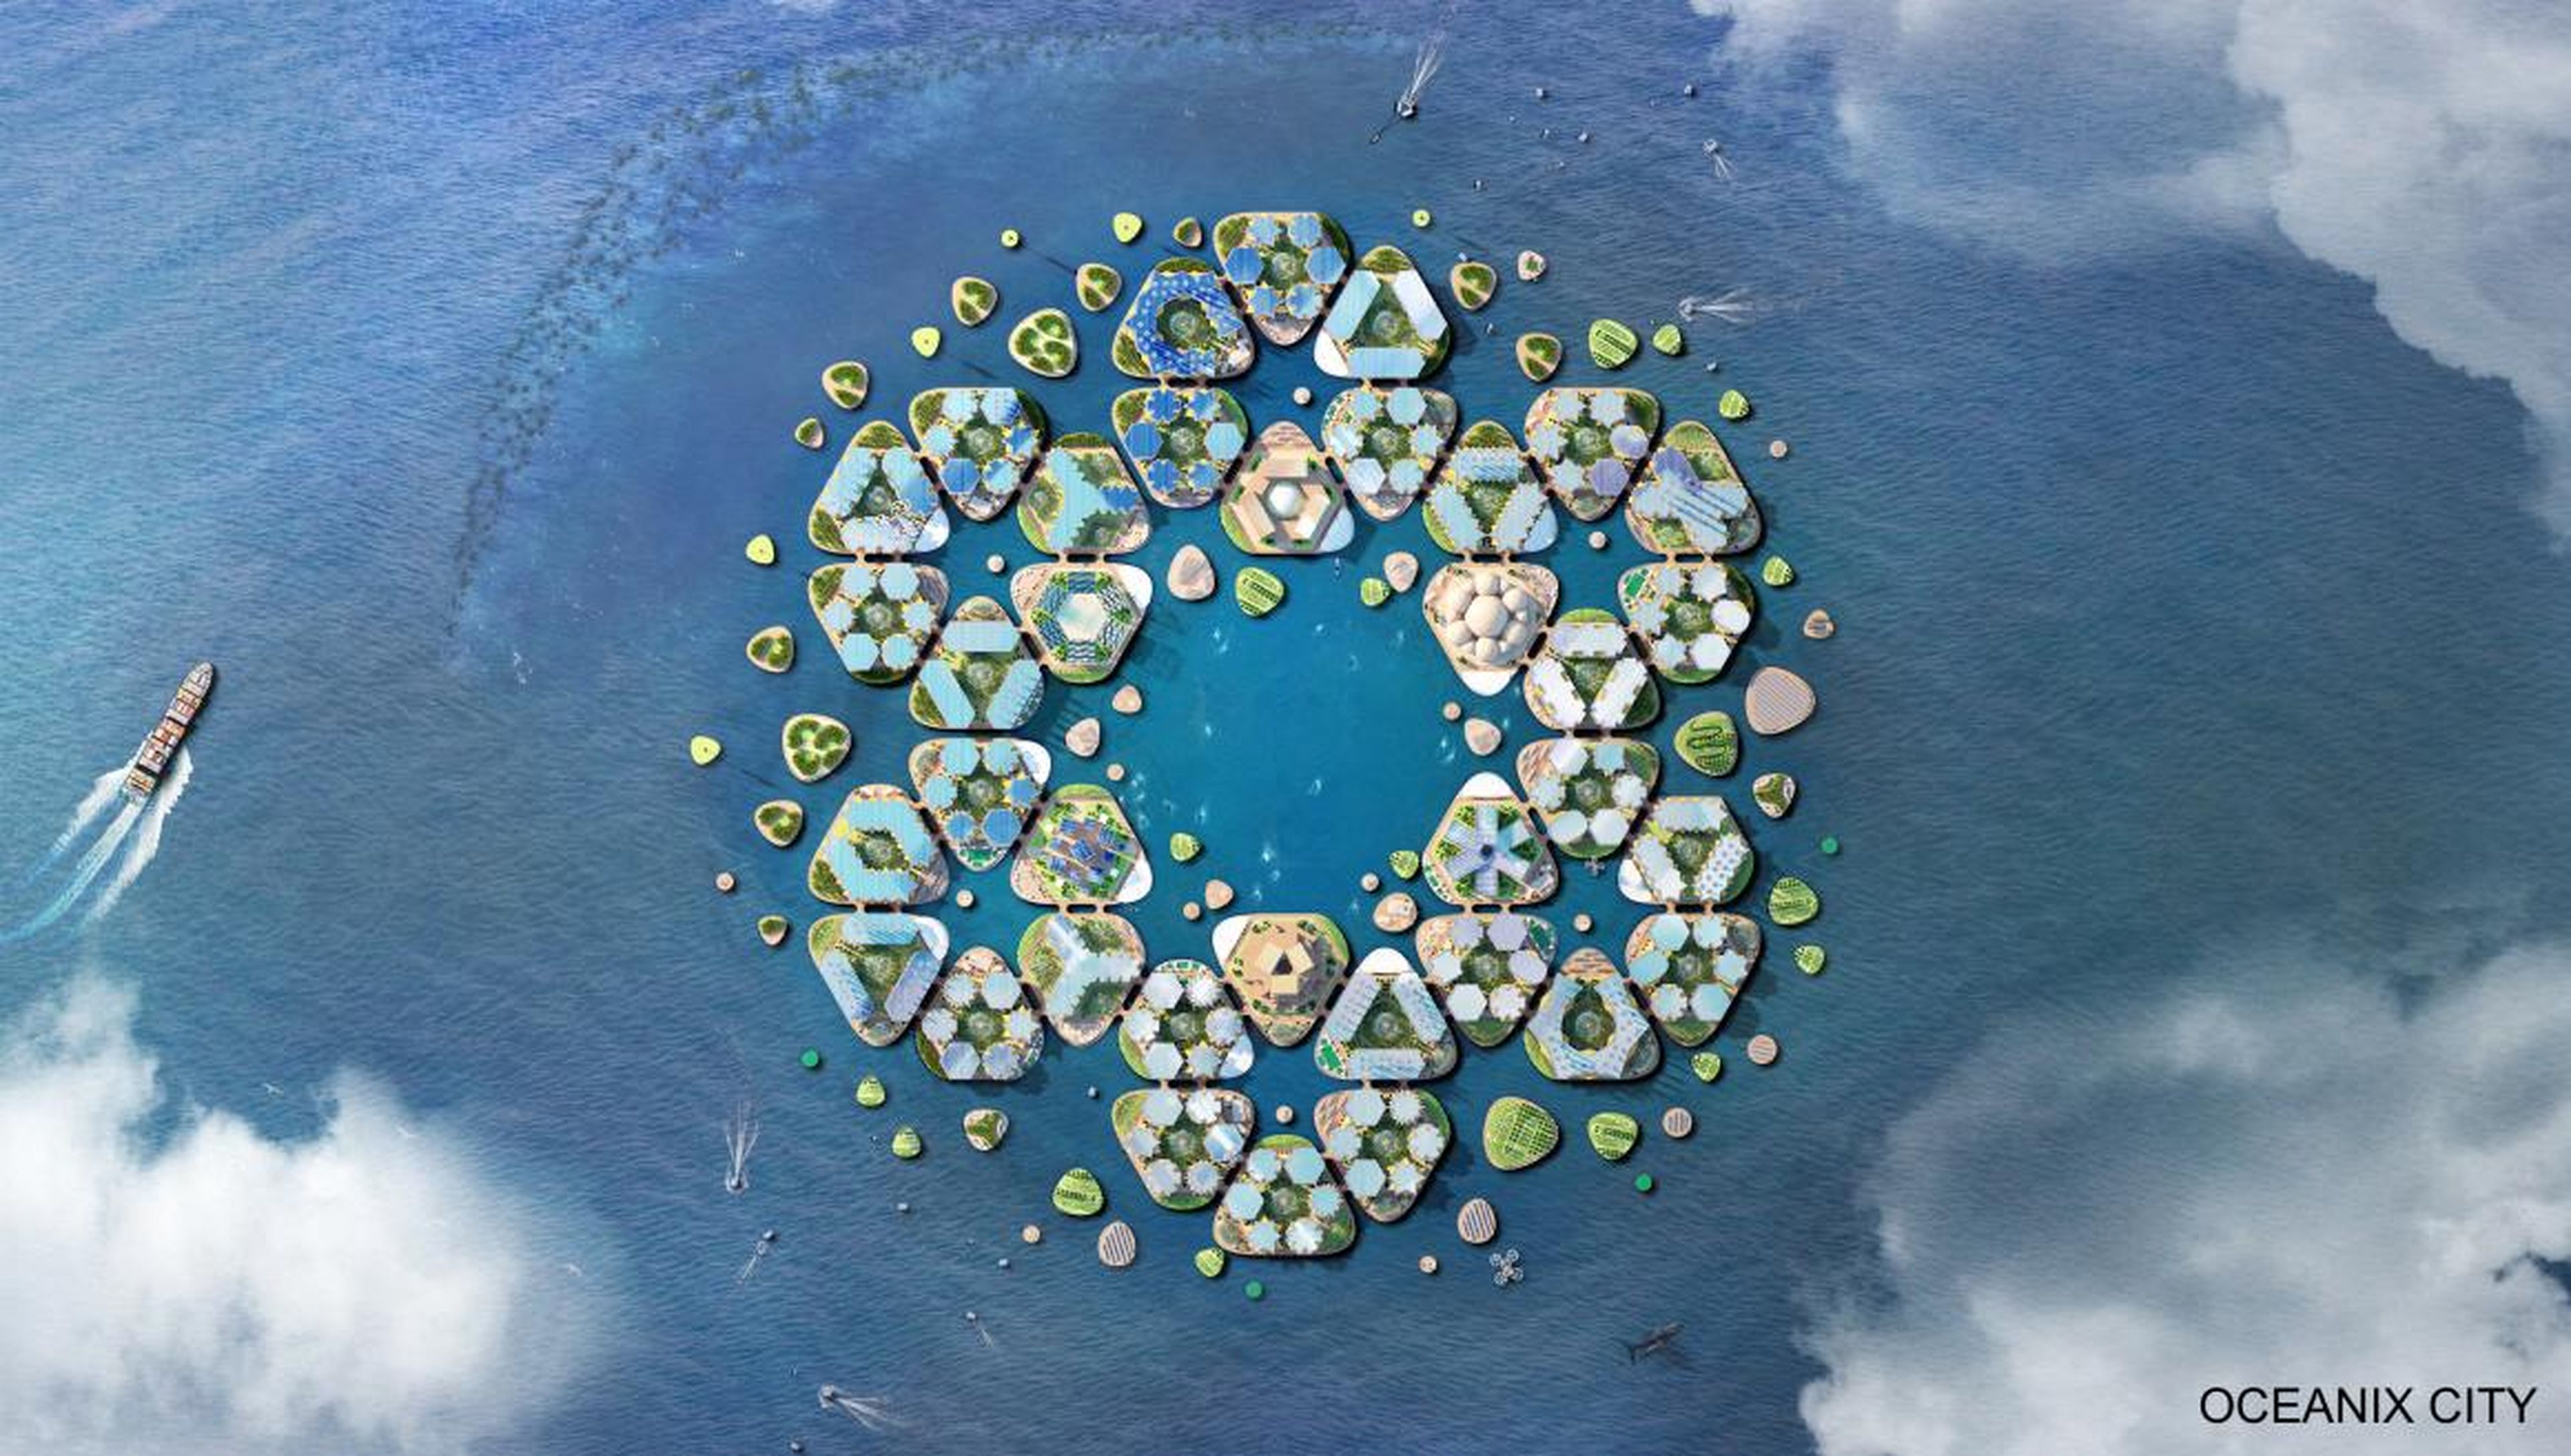 The city would essentially be a collection of hexagonal platforms that can each hold around 300 residents.